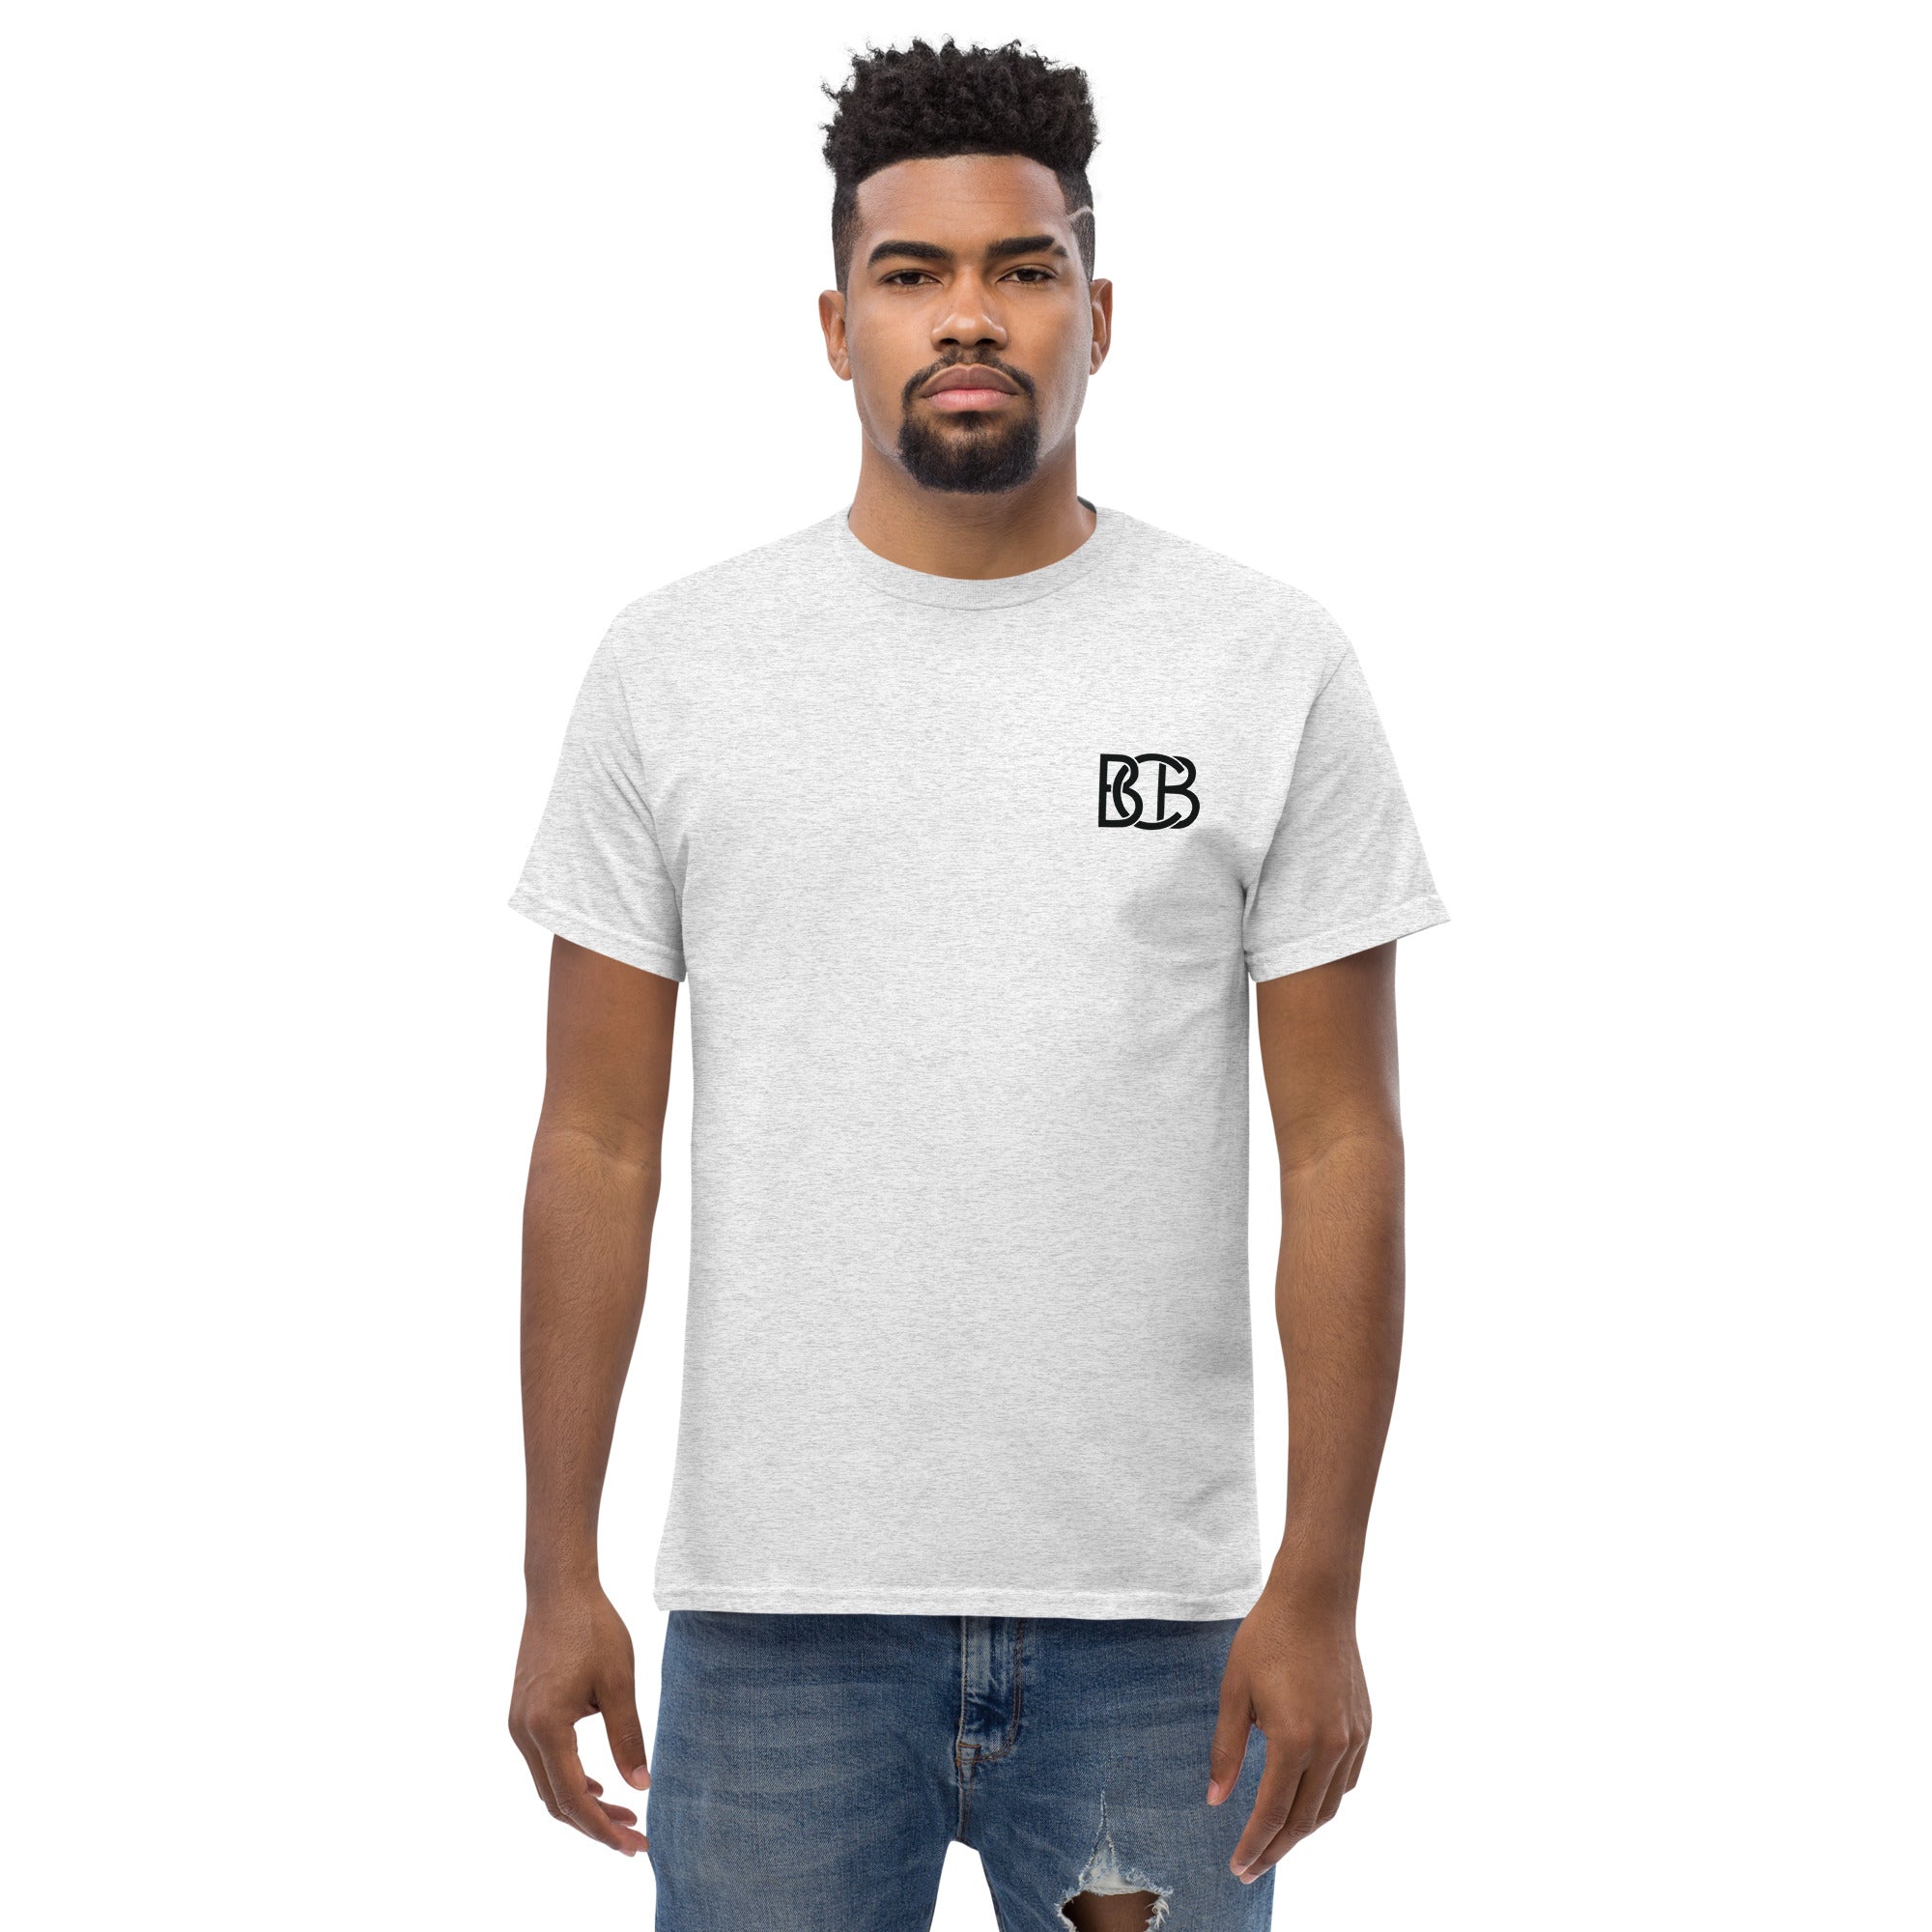 Scarred hands saved the world  I  Men's classic tee